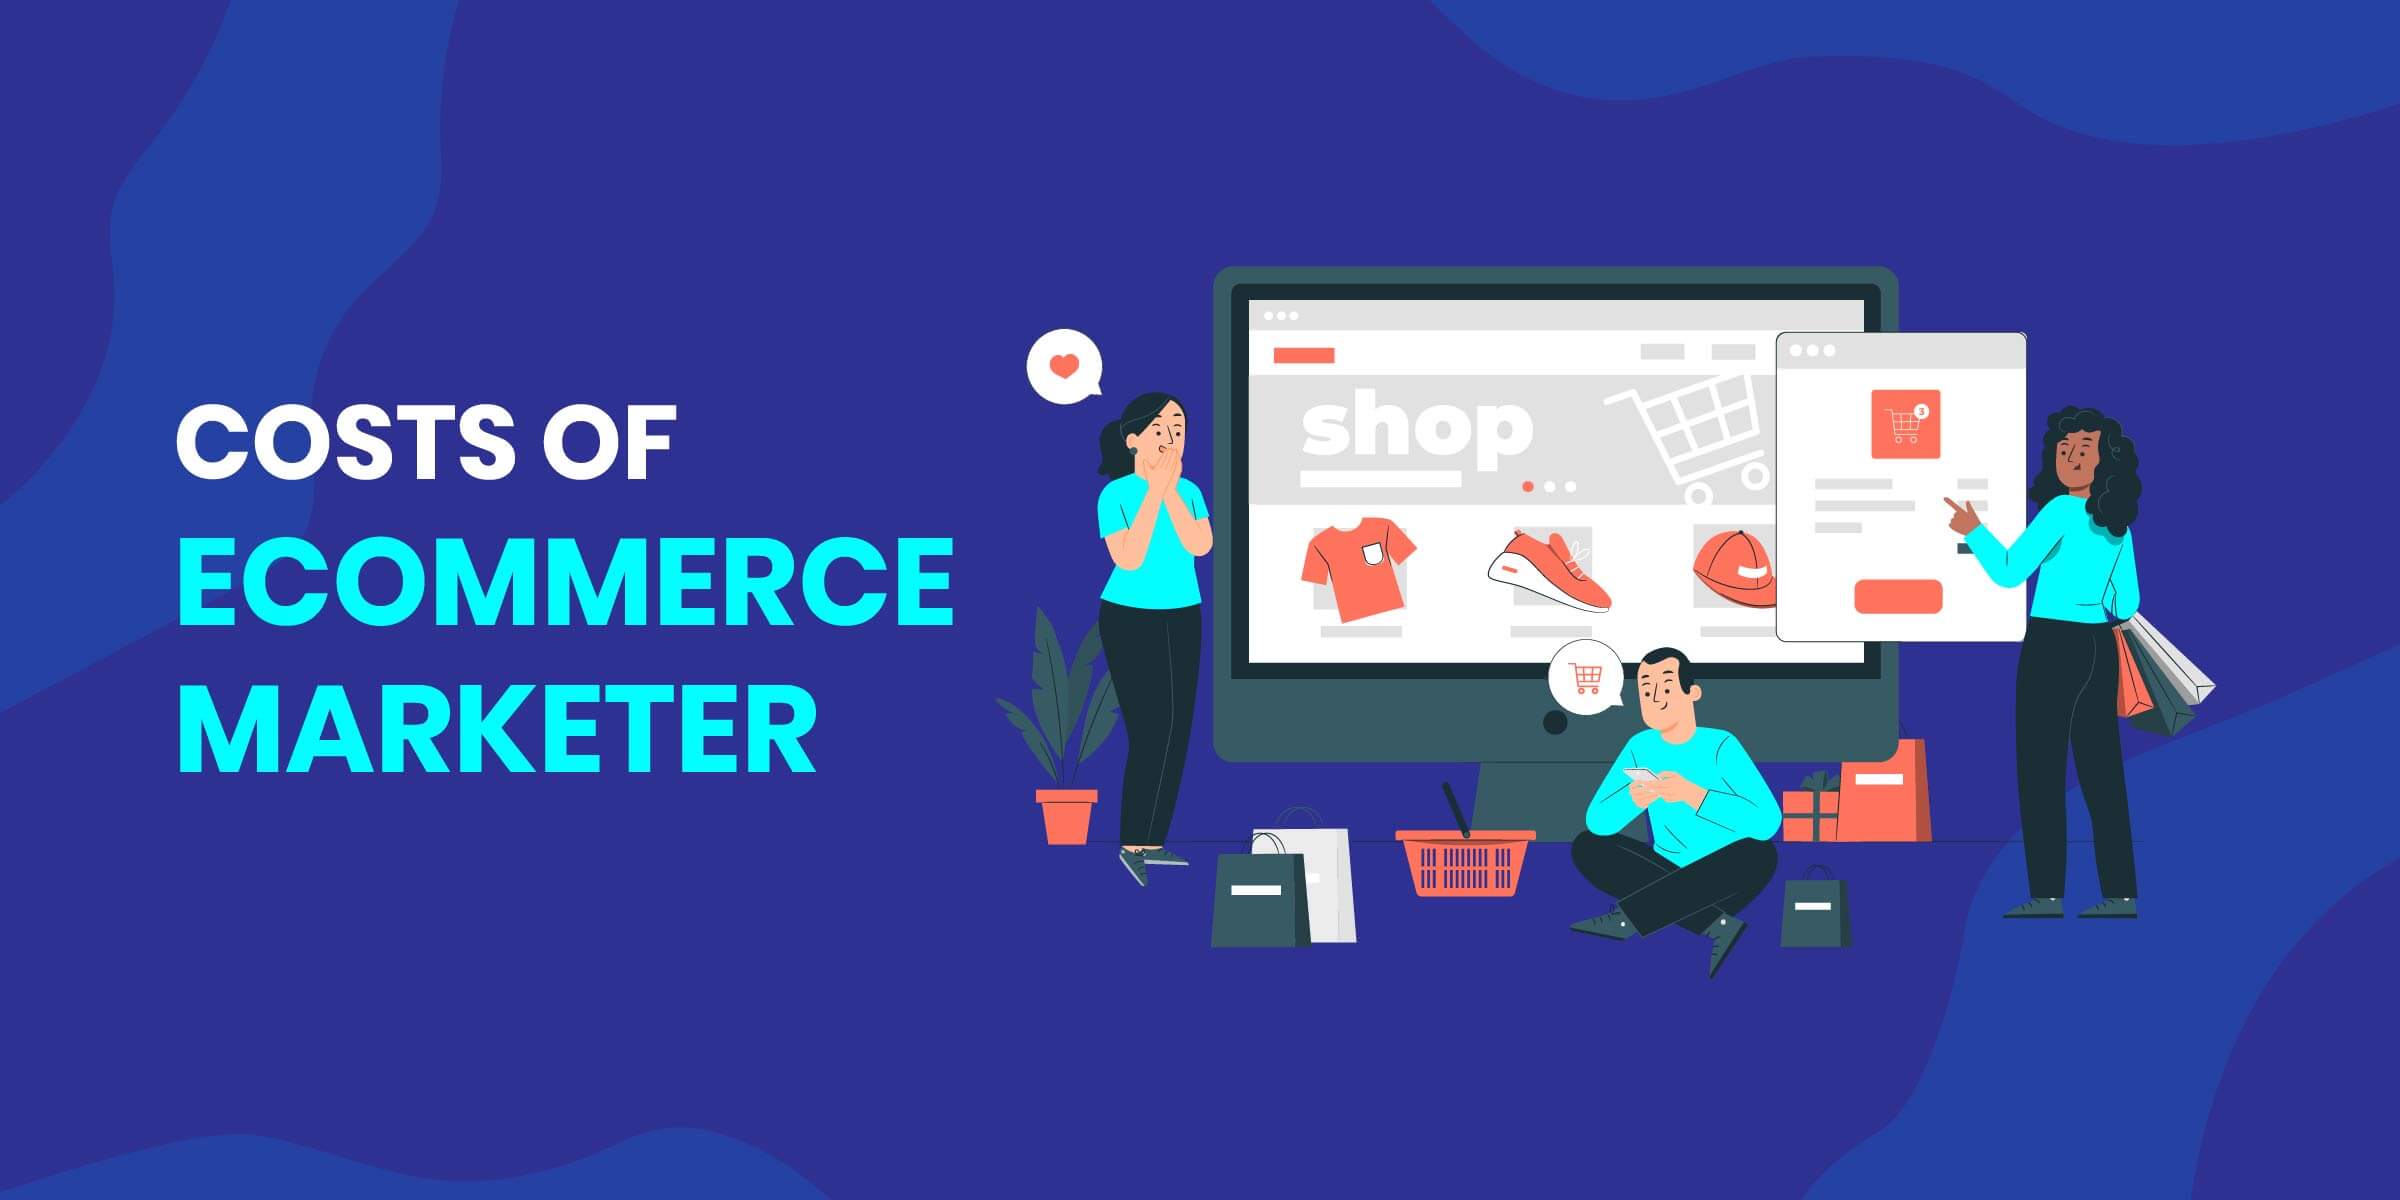 Costs of eCommerce Marketer